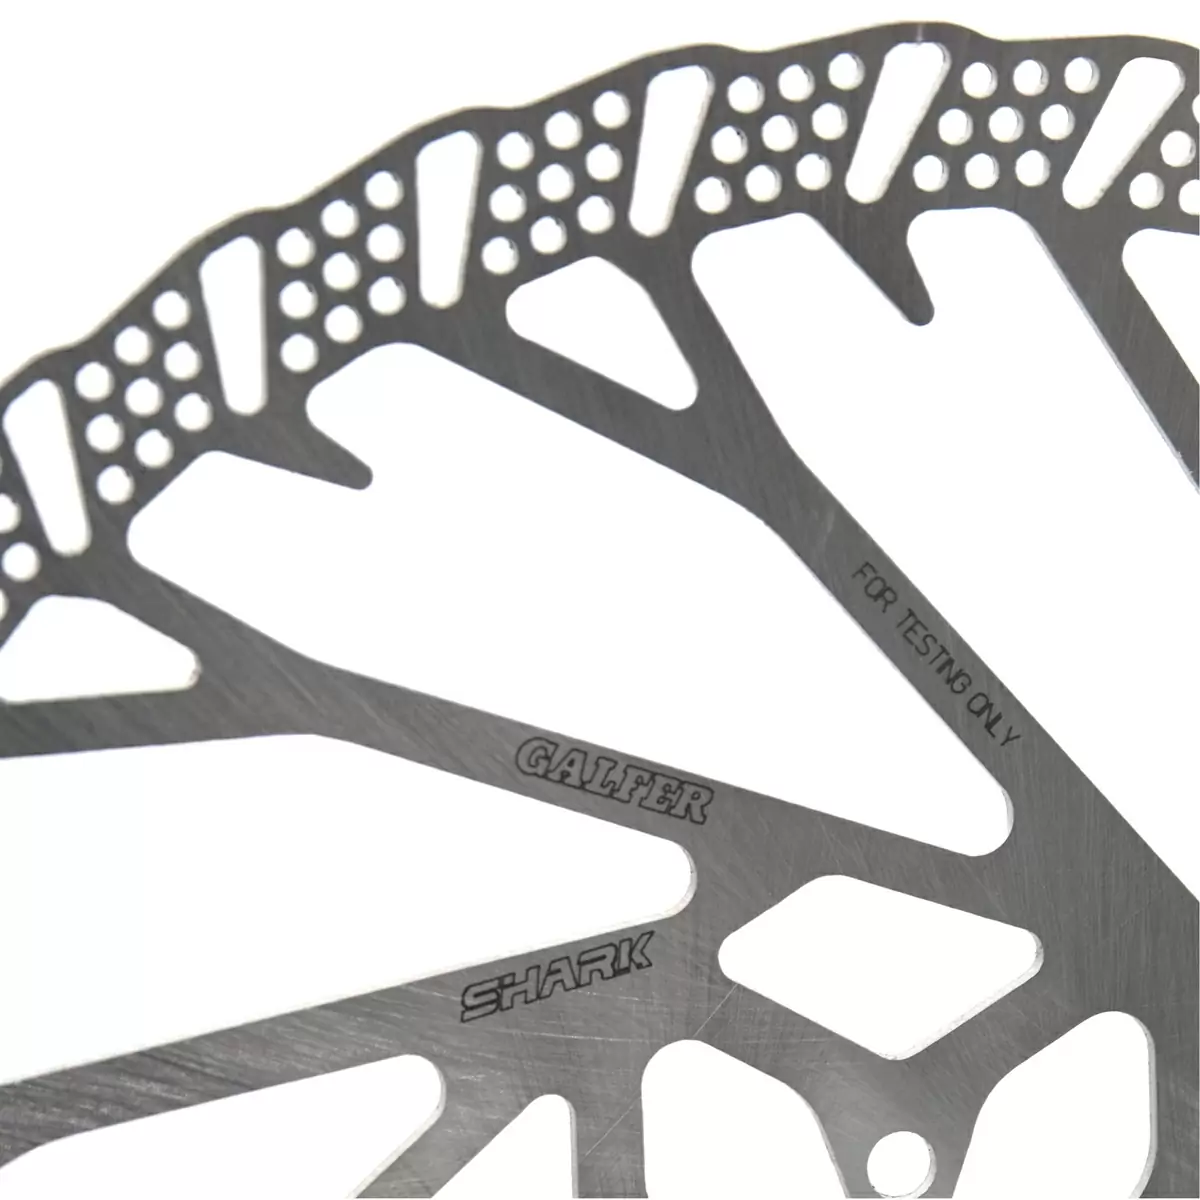 Shark Disc 223mm 6 holes 2mm thickness #1